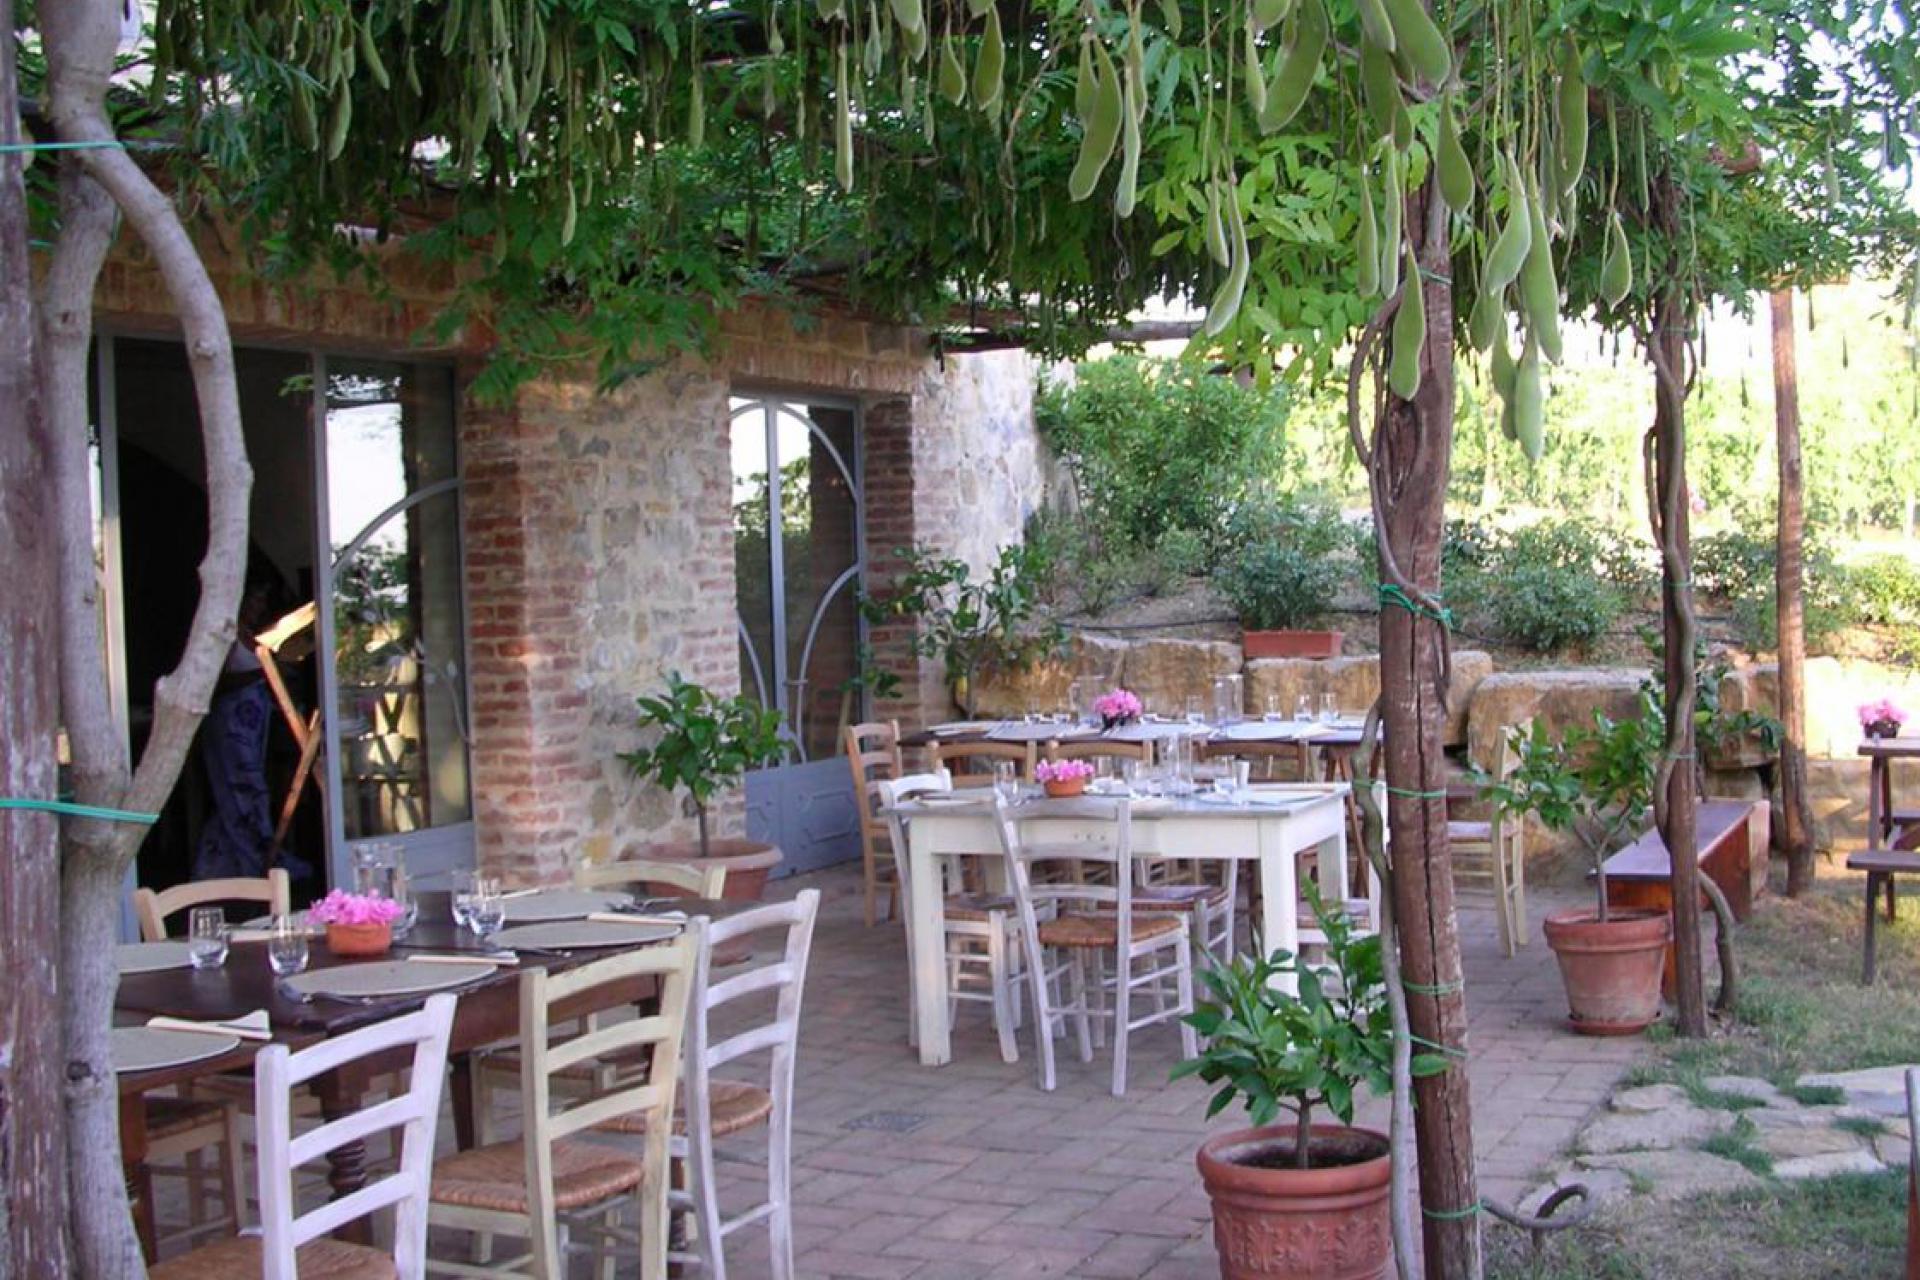 Rooms B&B 10 minutes from Siena